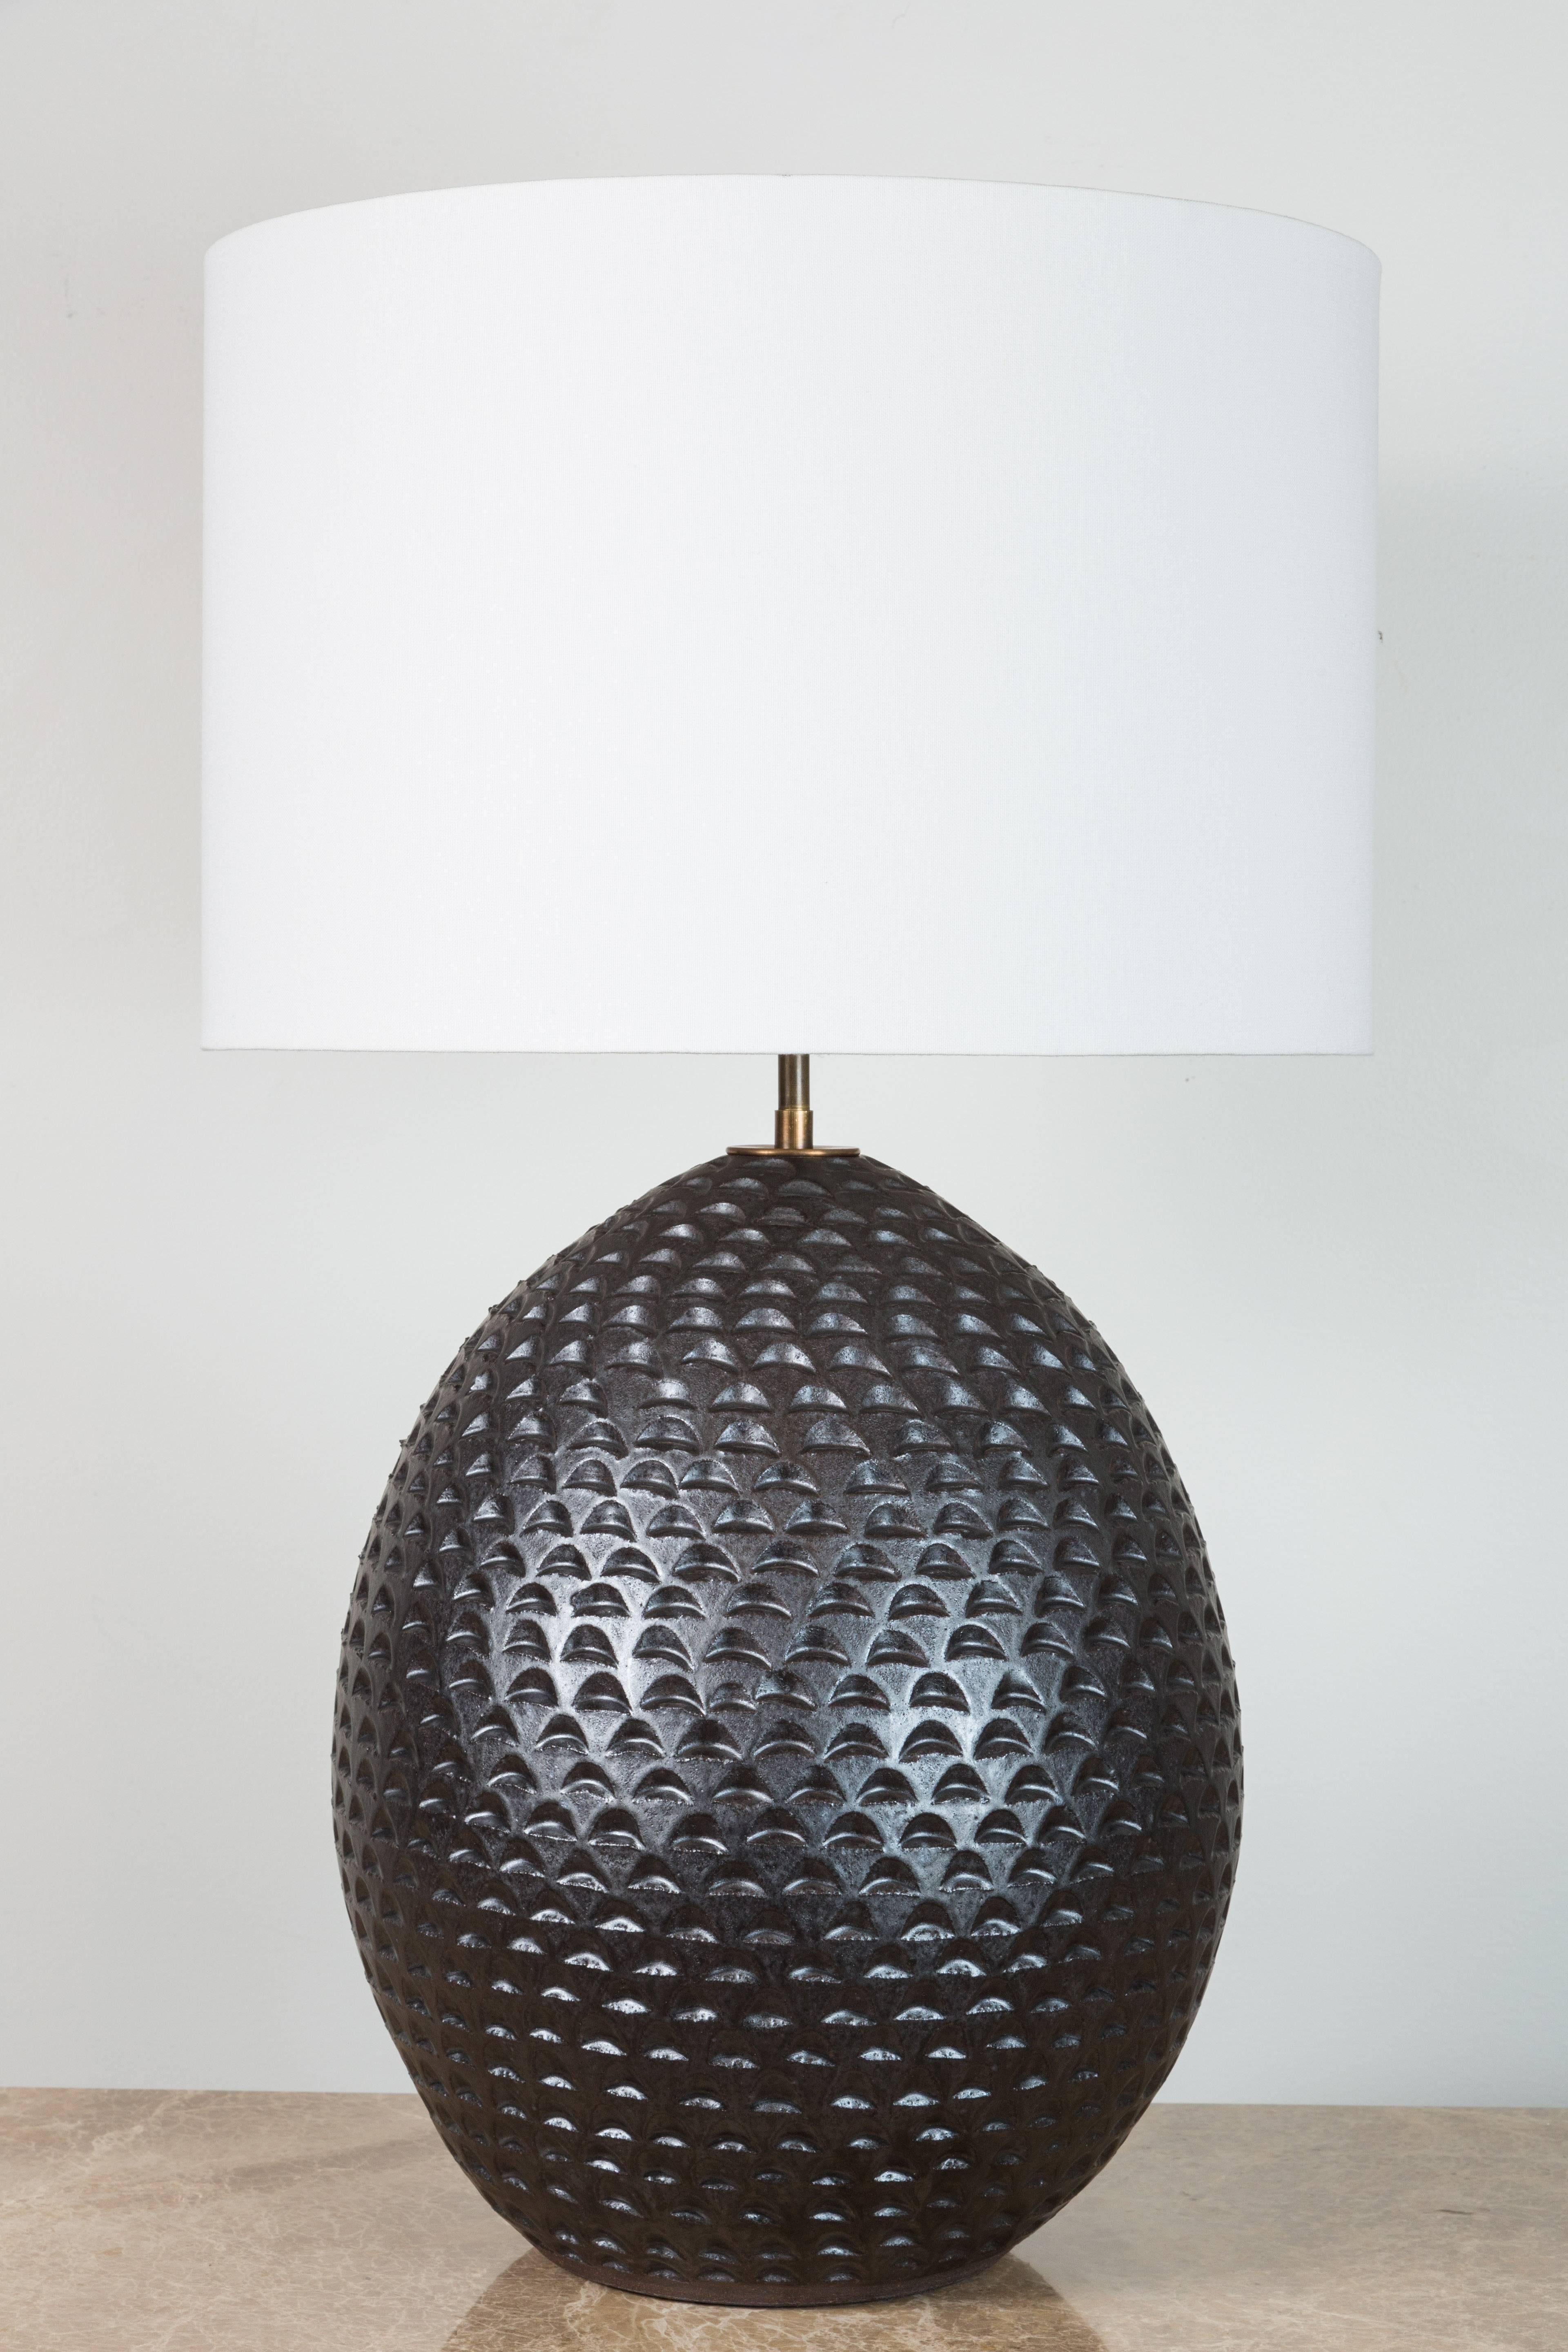 Contemporary Pair of Large Ceramic Pod Lamps by Victoria Morris for Lawson-Fenning